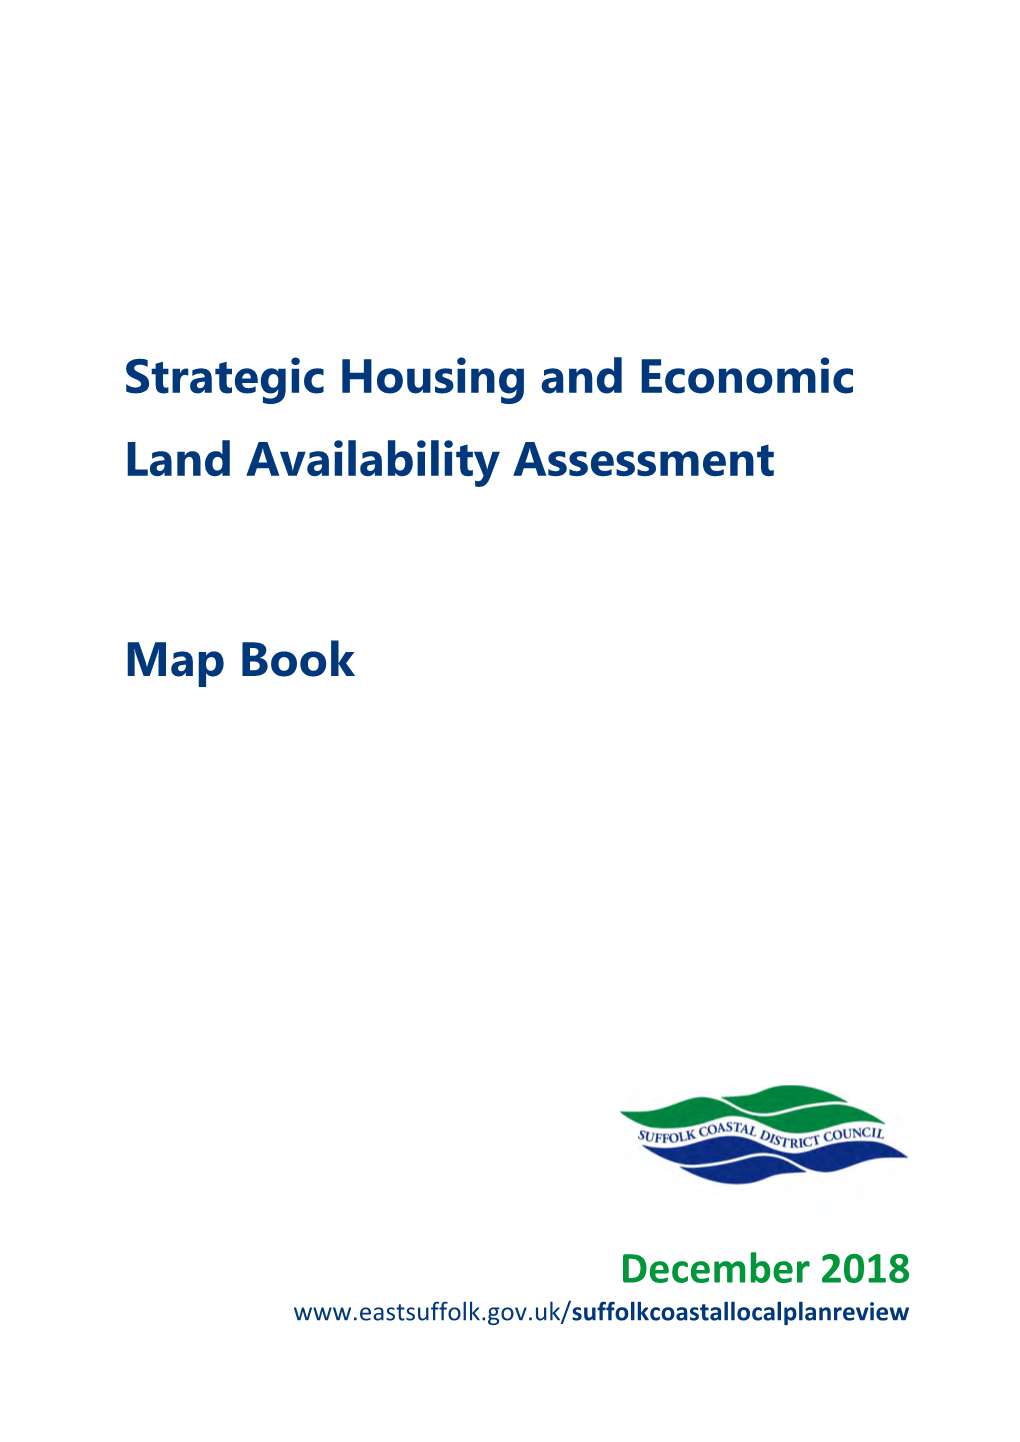 Strategic Housing and Economic Land Availability Assessment Map Book (December 2018)